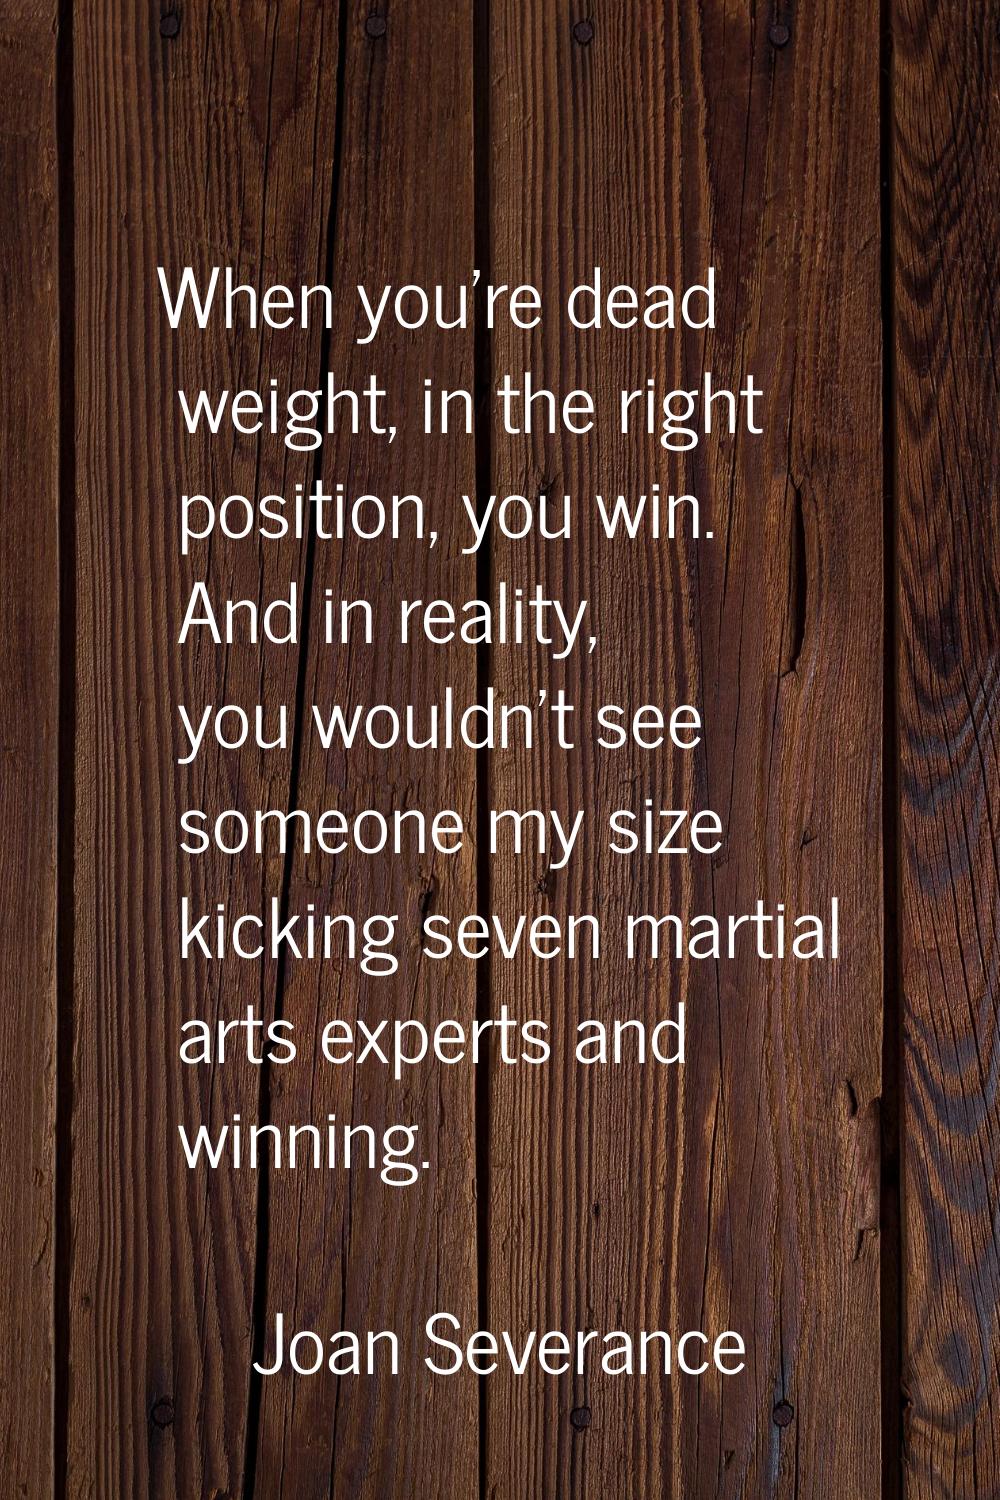 When you're dead weight, in the right position, you win. And in reality, you wouldn't see someone m